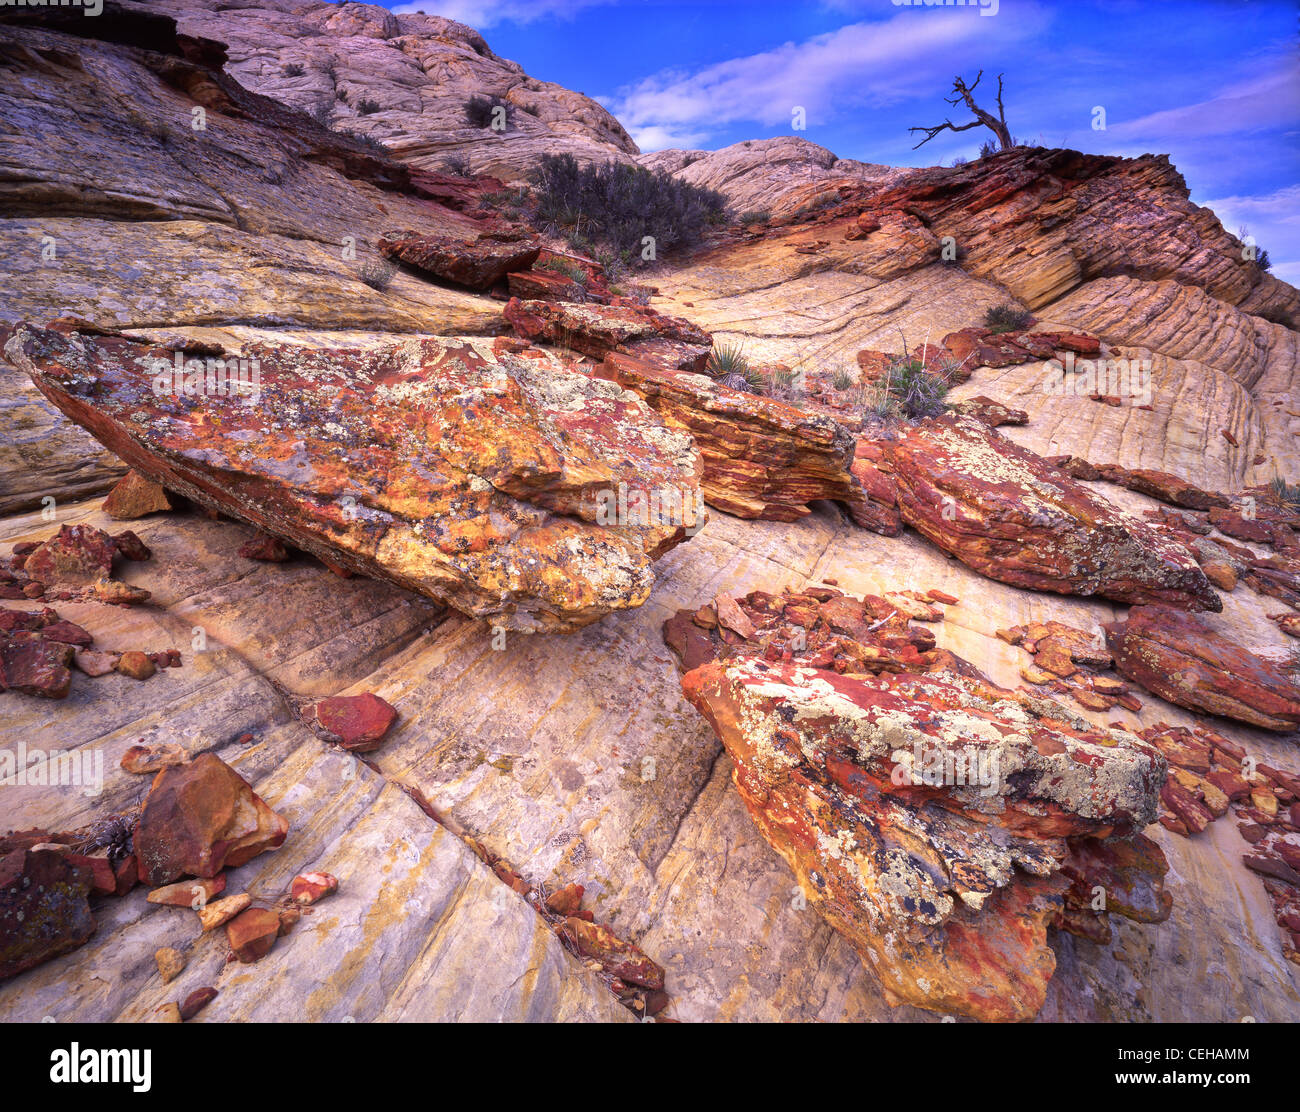 Colorful lichen covered rocks adorn the side of a butte along Boulder-Notom Road near the town of Bolder, Utah. Stock Photo